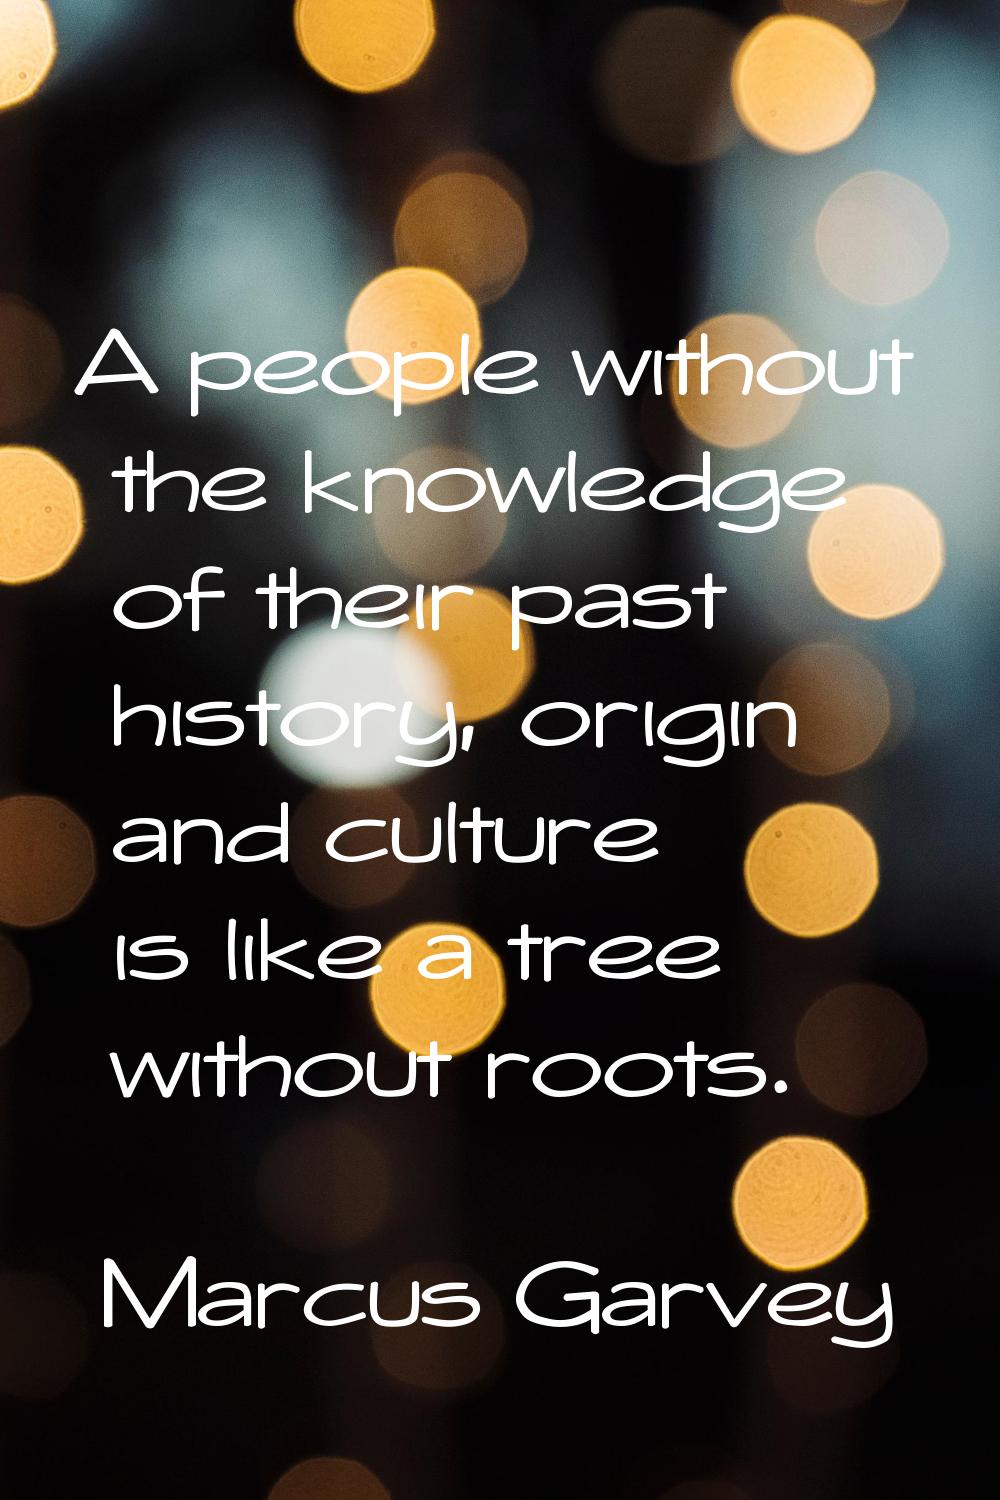 A people without the knowledge of their past history, origin and culture is like a tree without roo